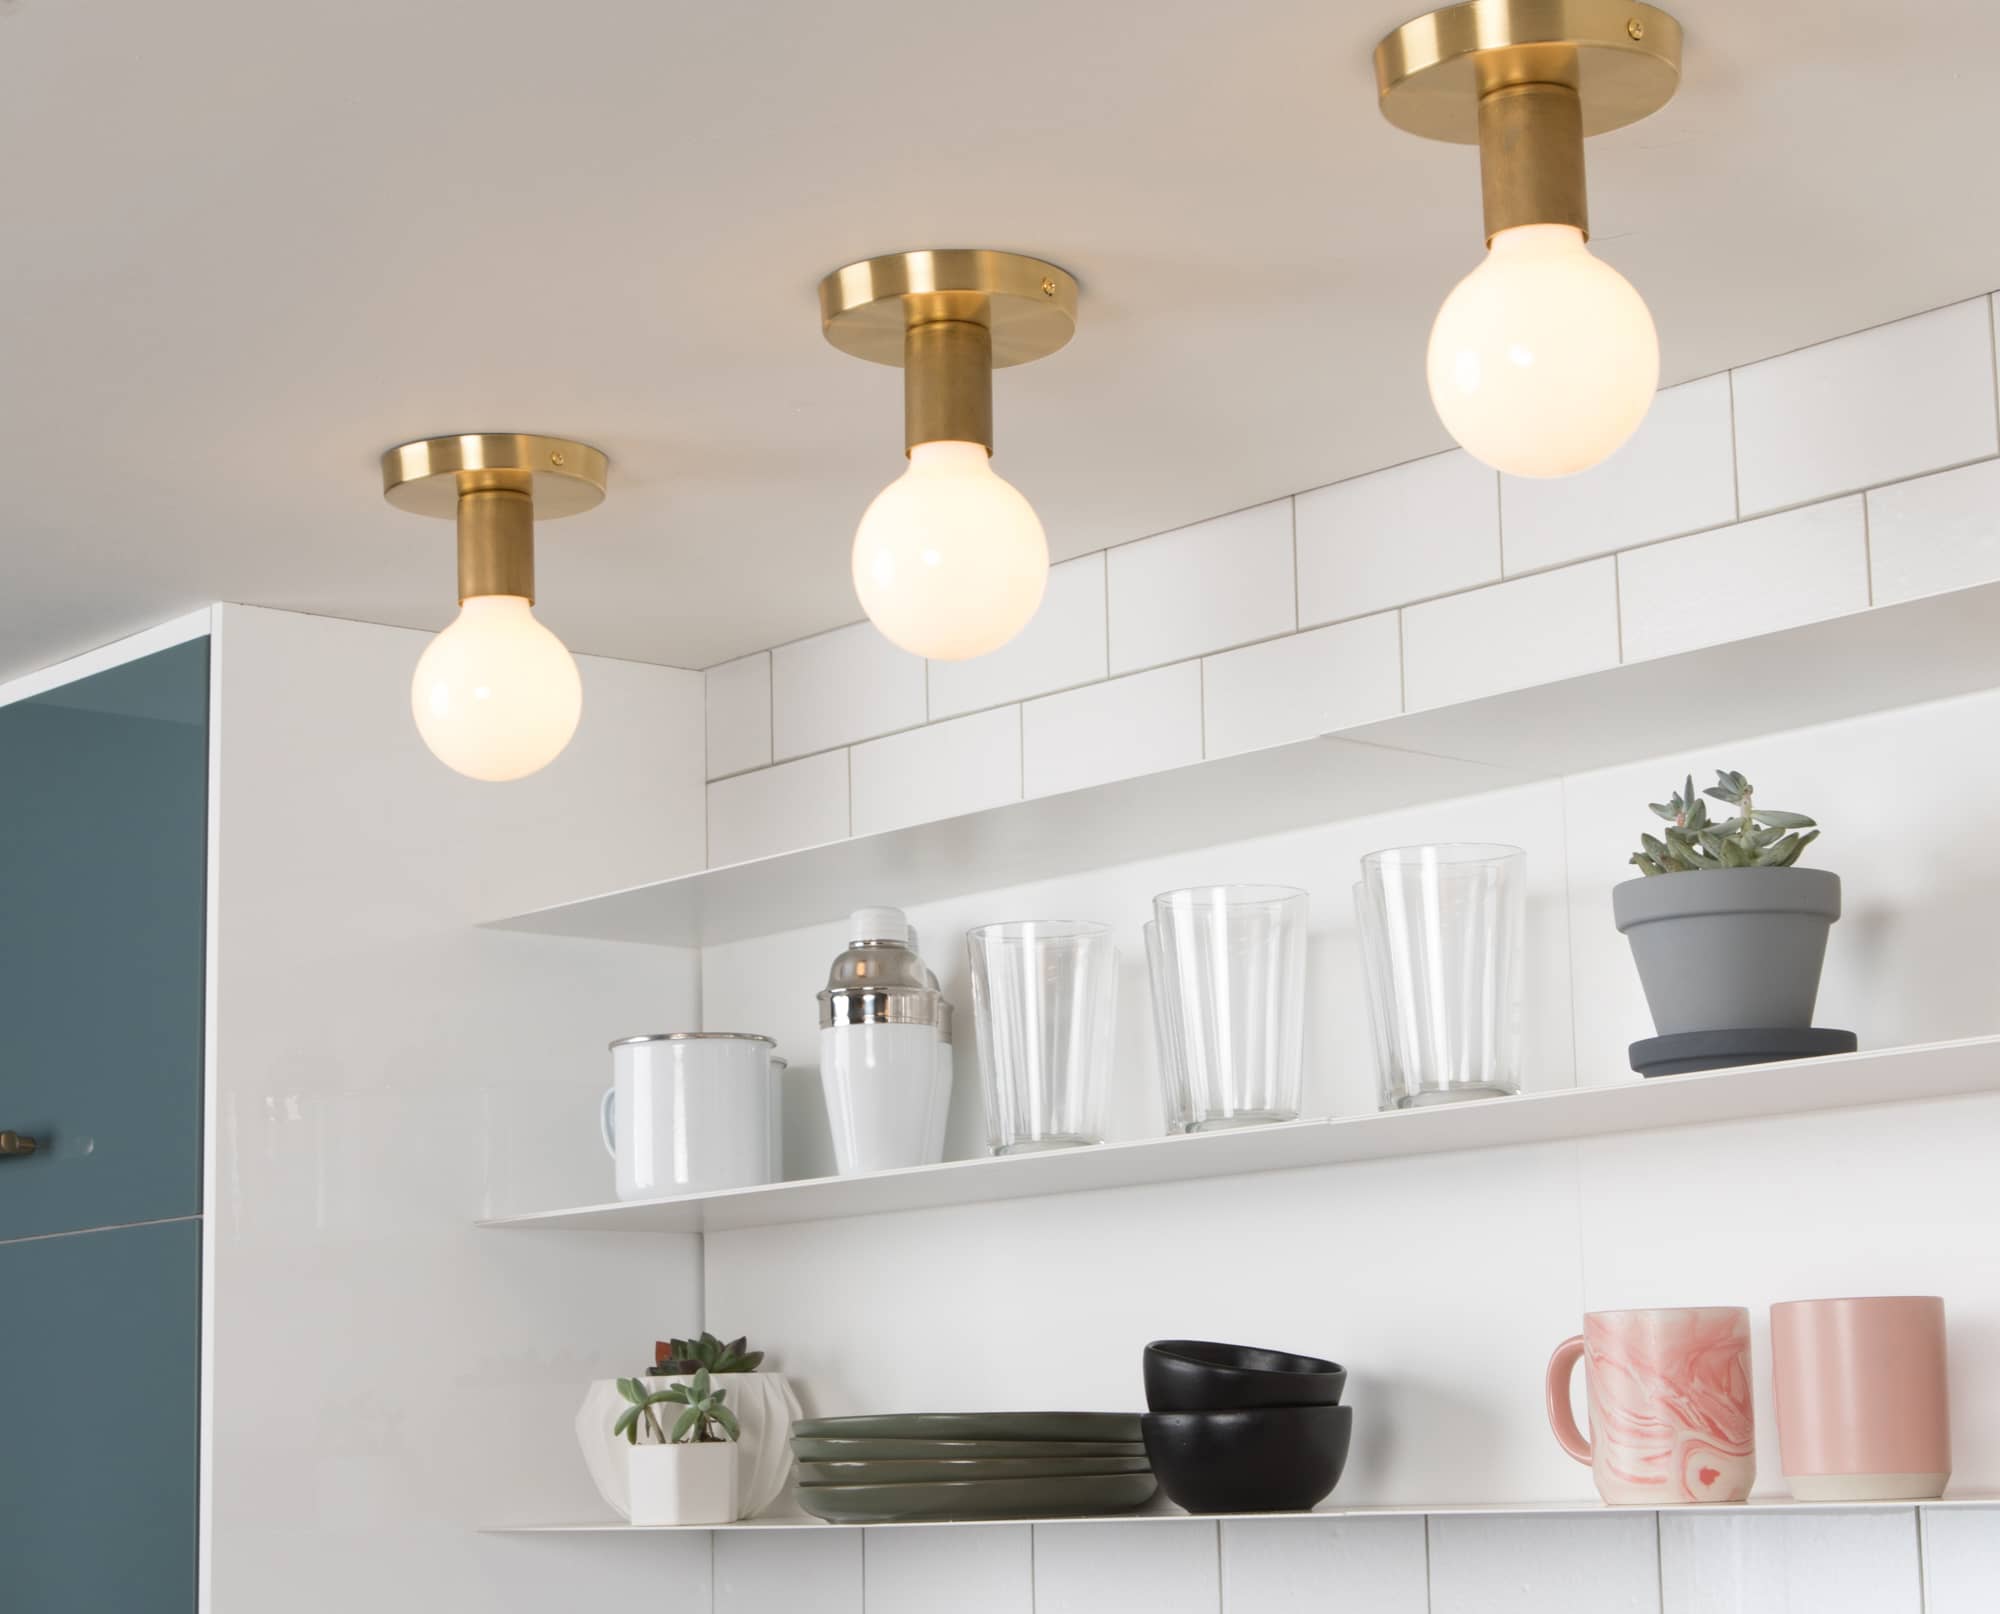 Button Lights in Raw Brass finish. Pictured with a G40 milk glass light bulbs. Mounted on ceiling over a kitchen counter and exposed shelving